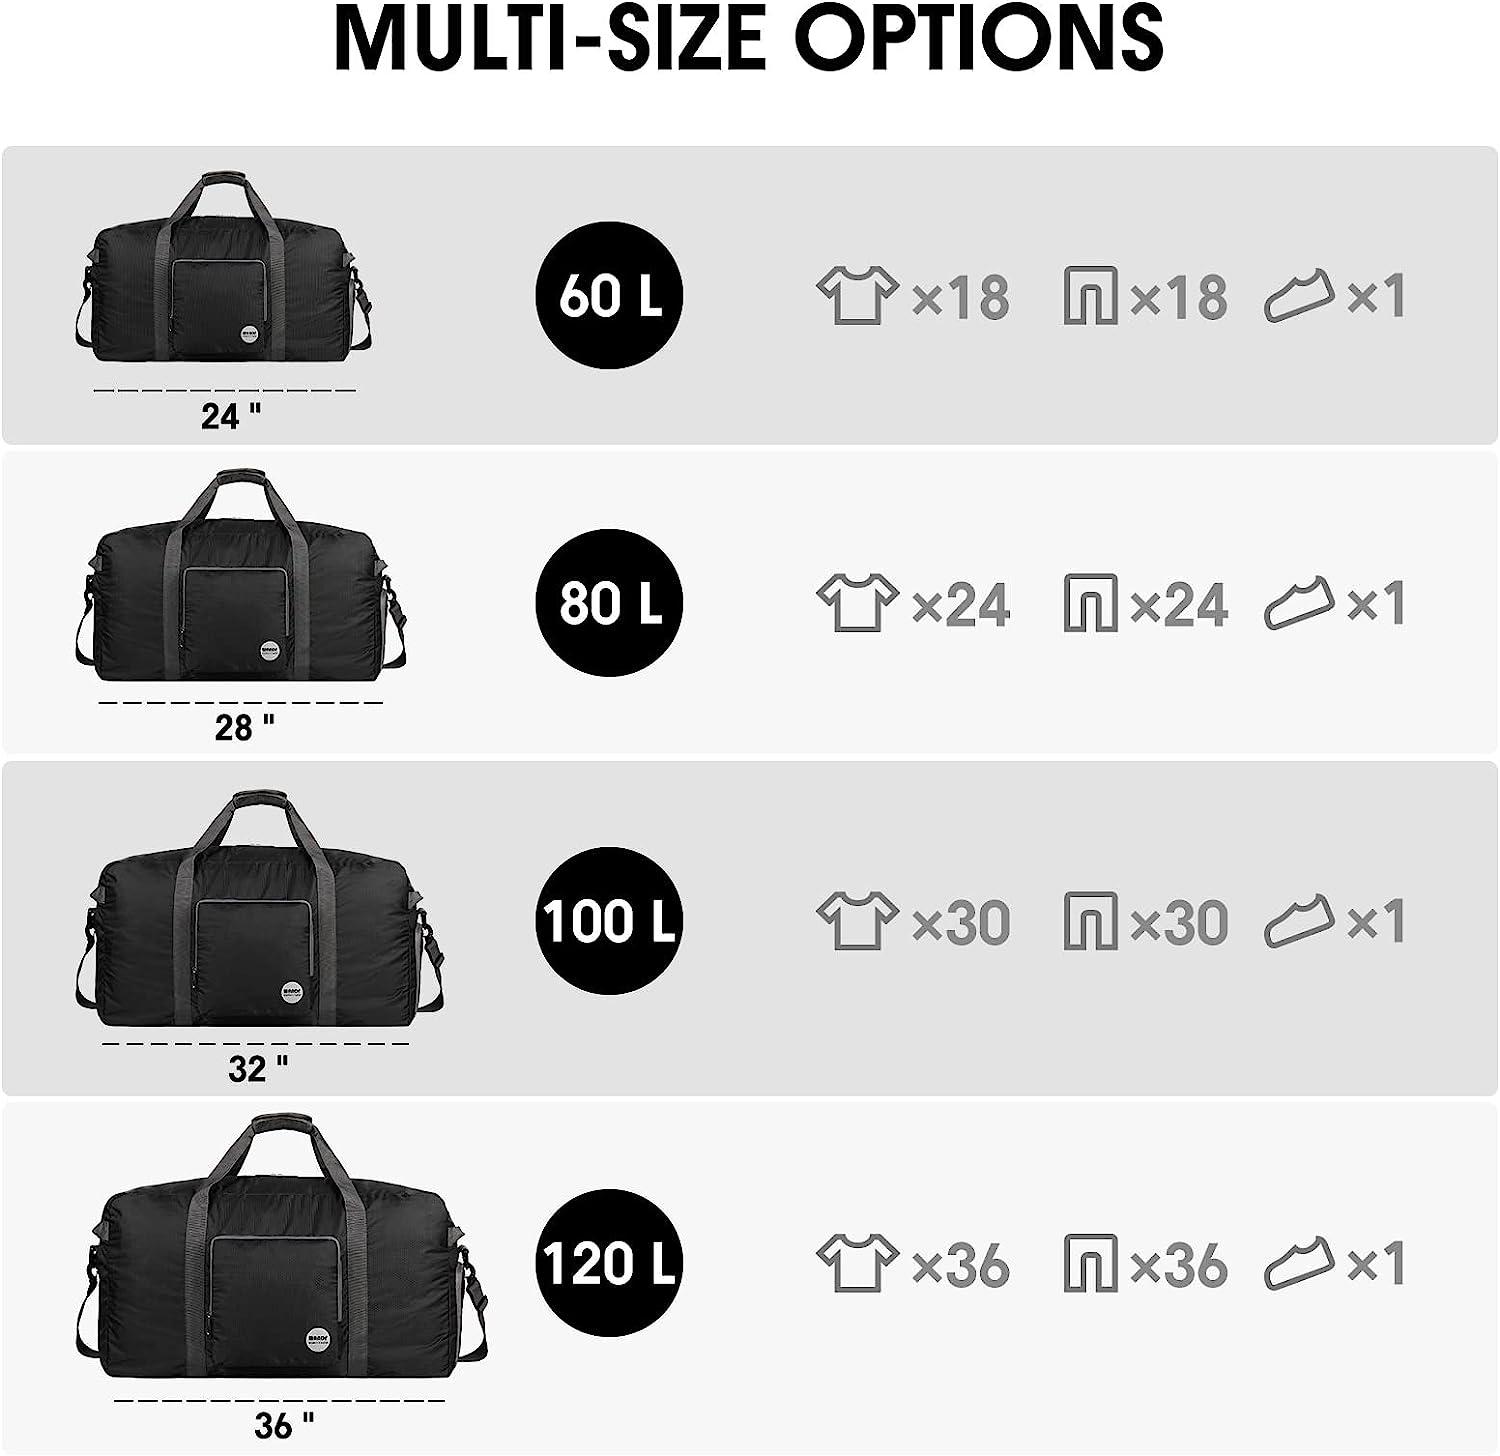 PARA JOHN 4 Pcs Travel Luggage Suitcase Trolley Set - Trolley Bag, Carry On  Hand Cabin Luggage